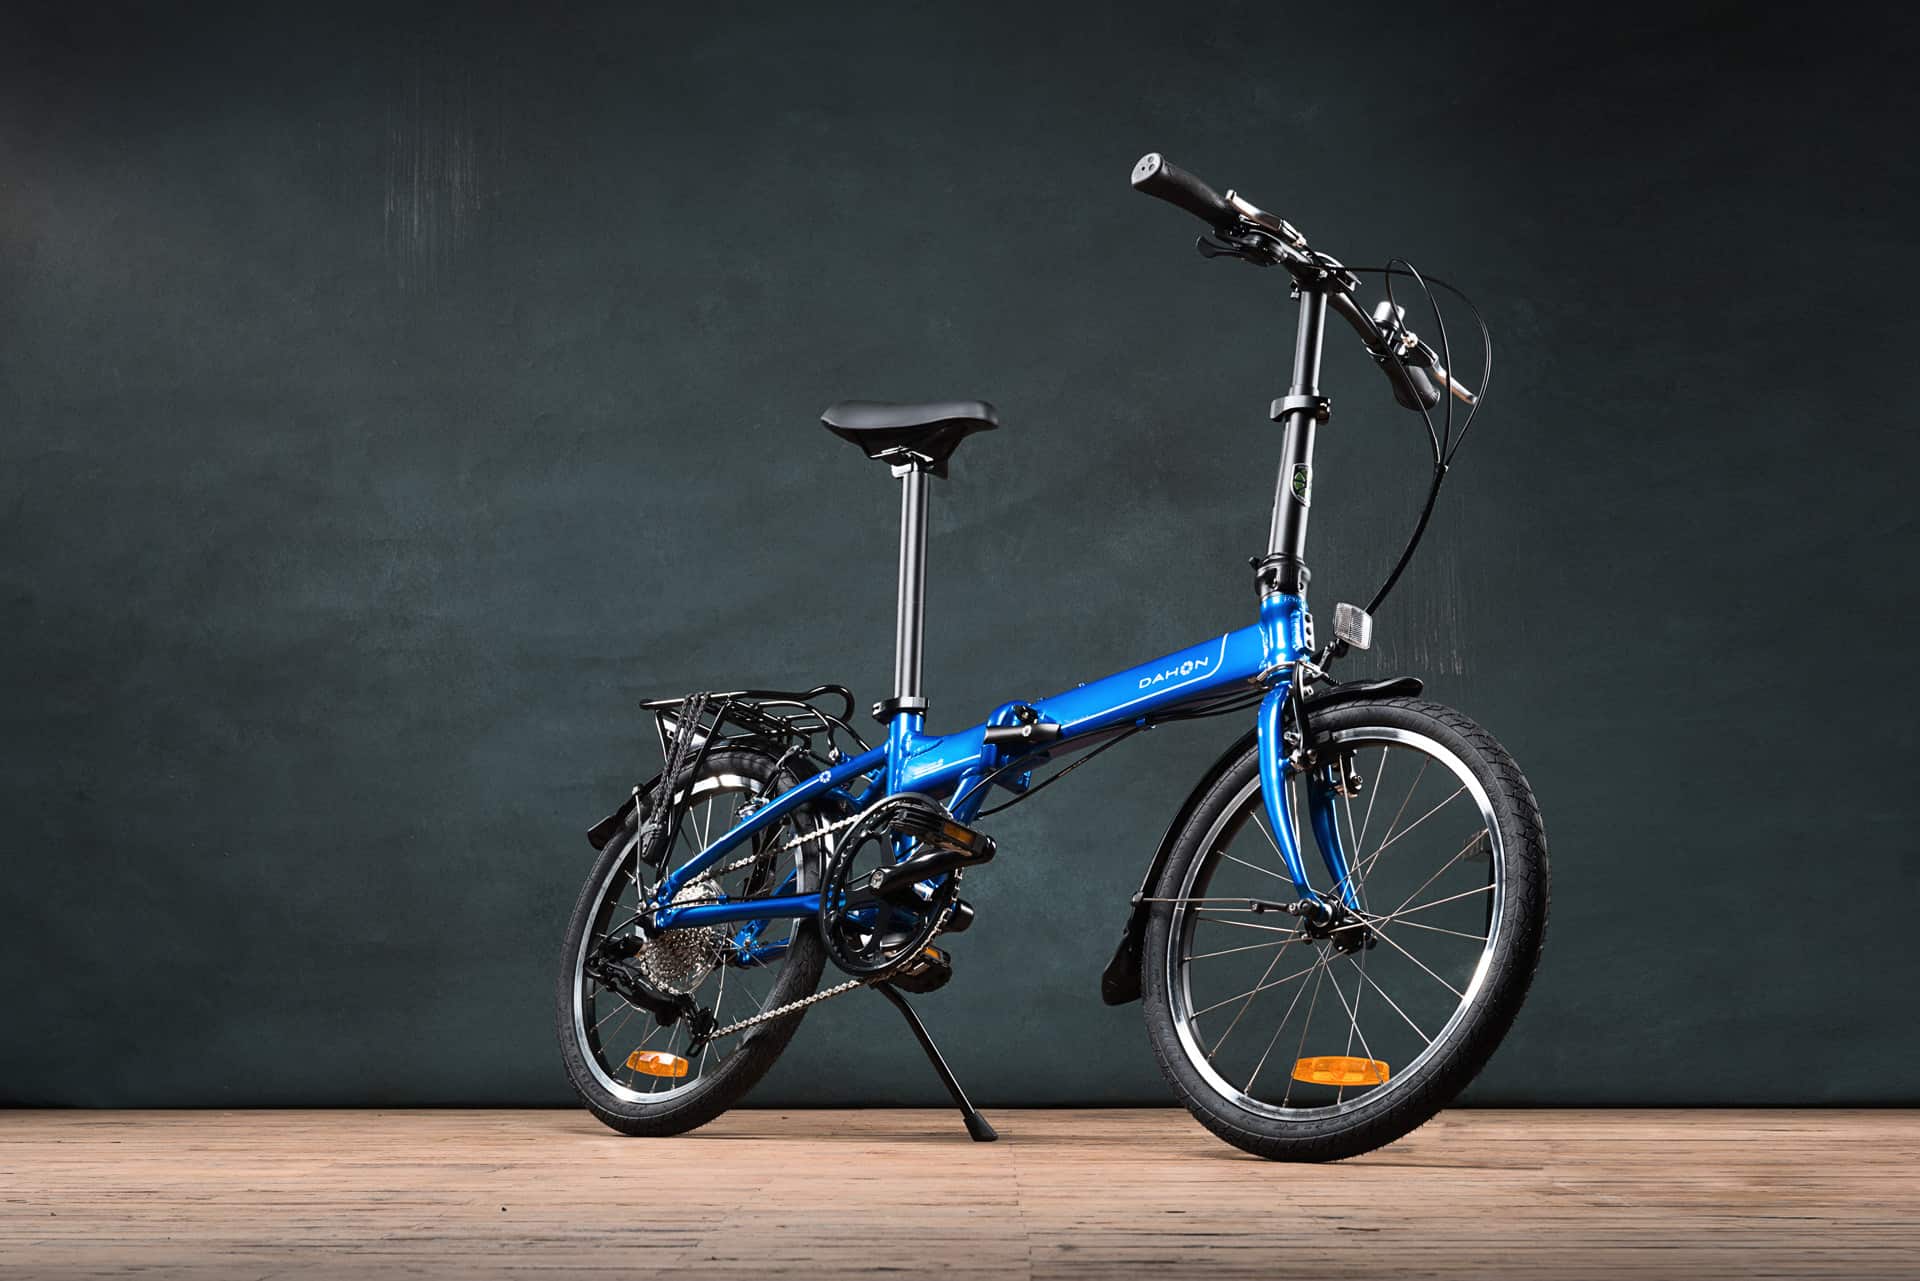 dahon folding bikes website, photography and content marketing Blue Dolphin